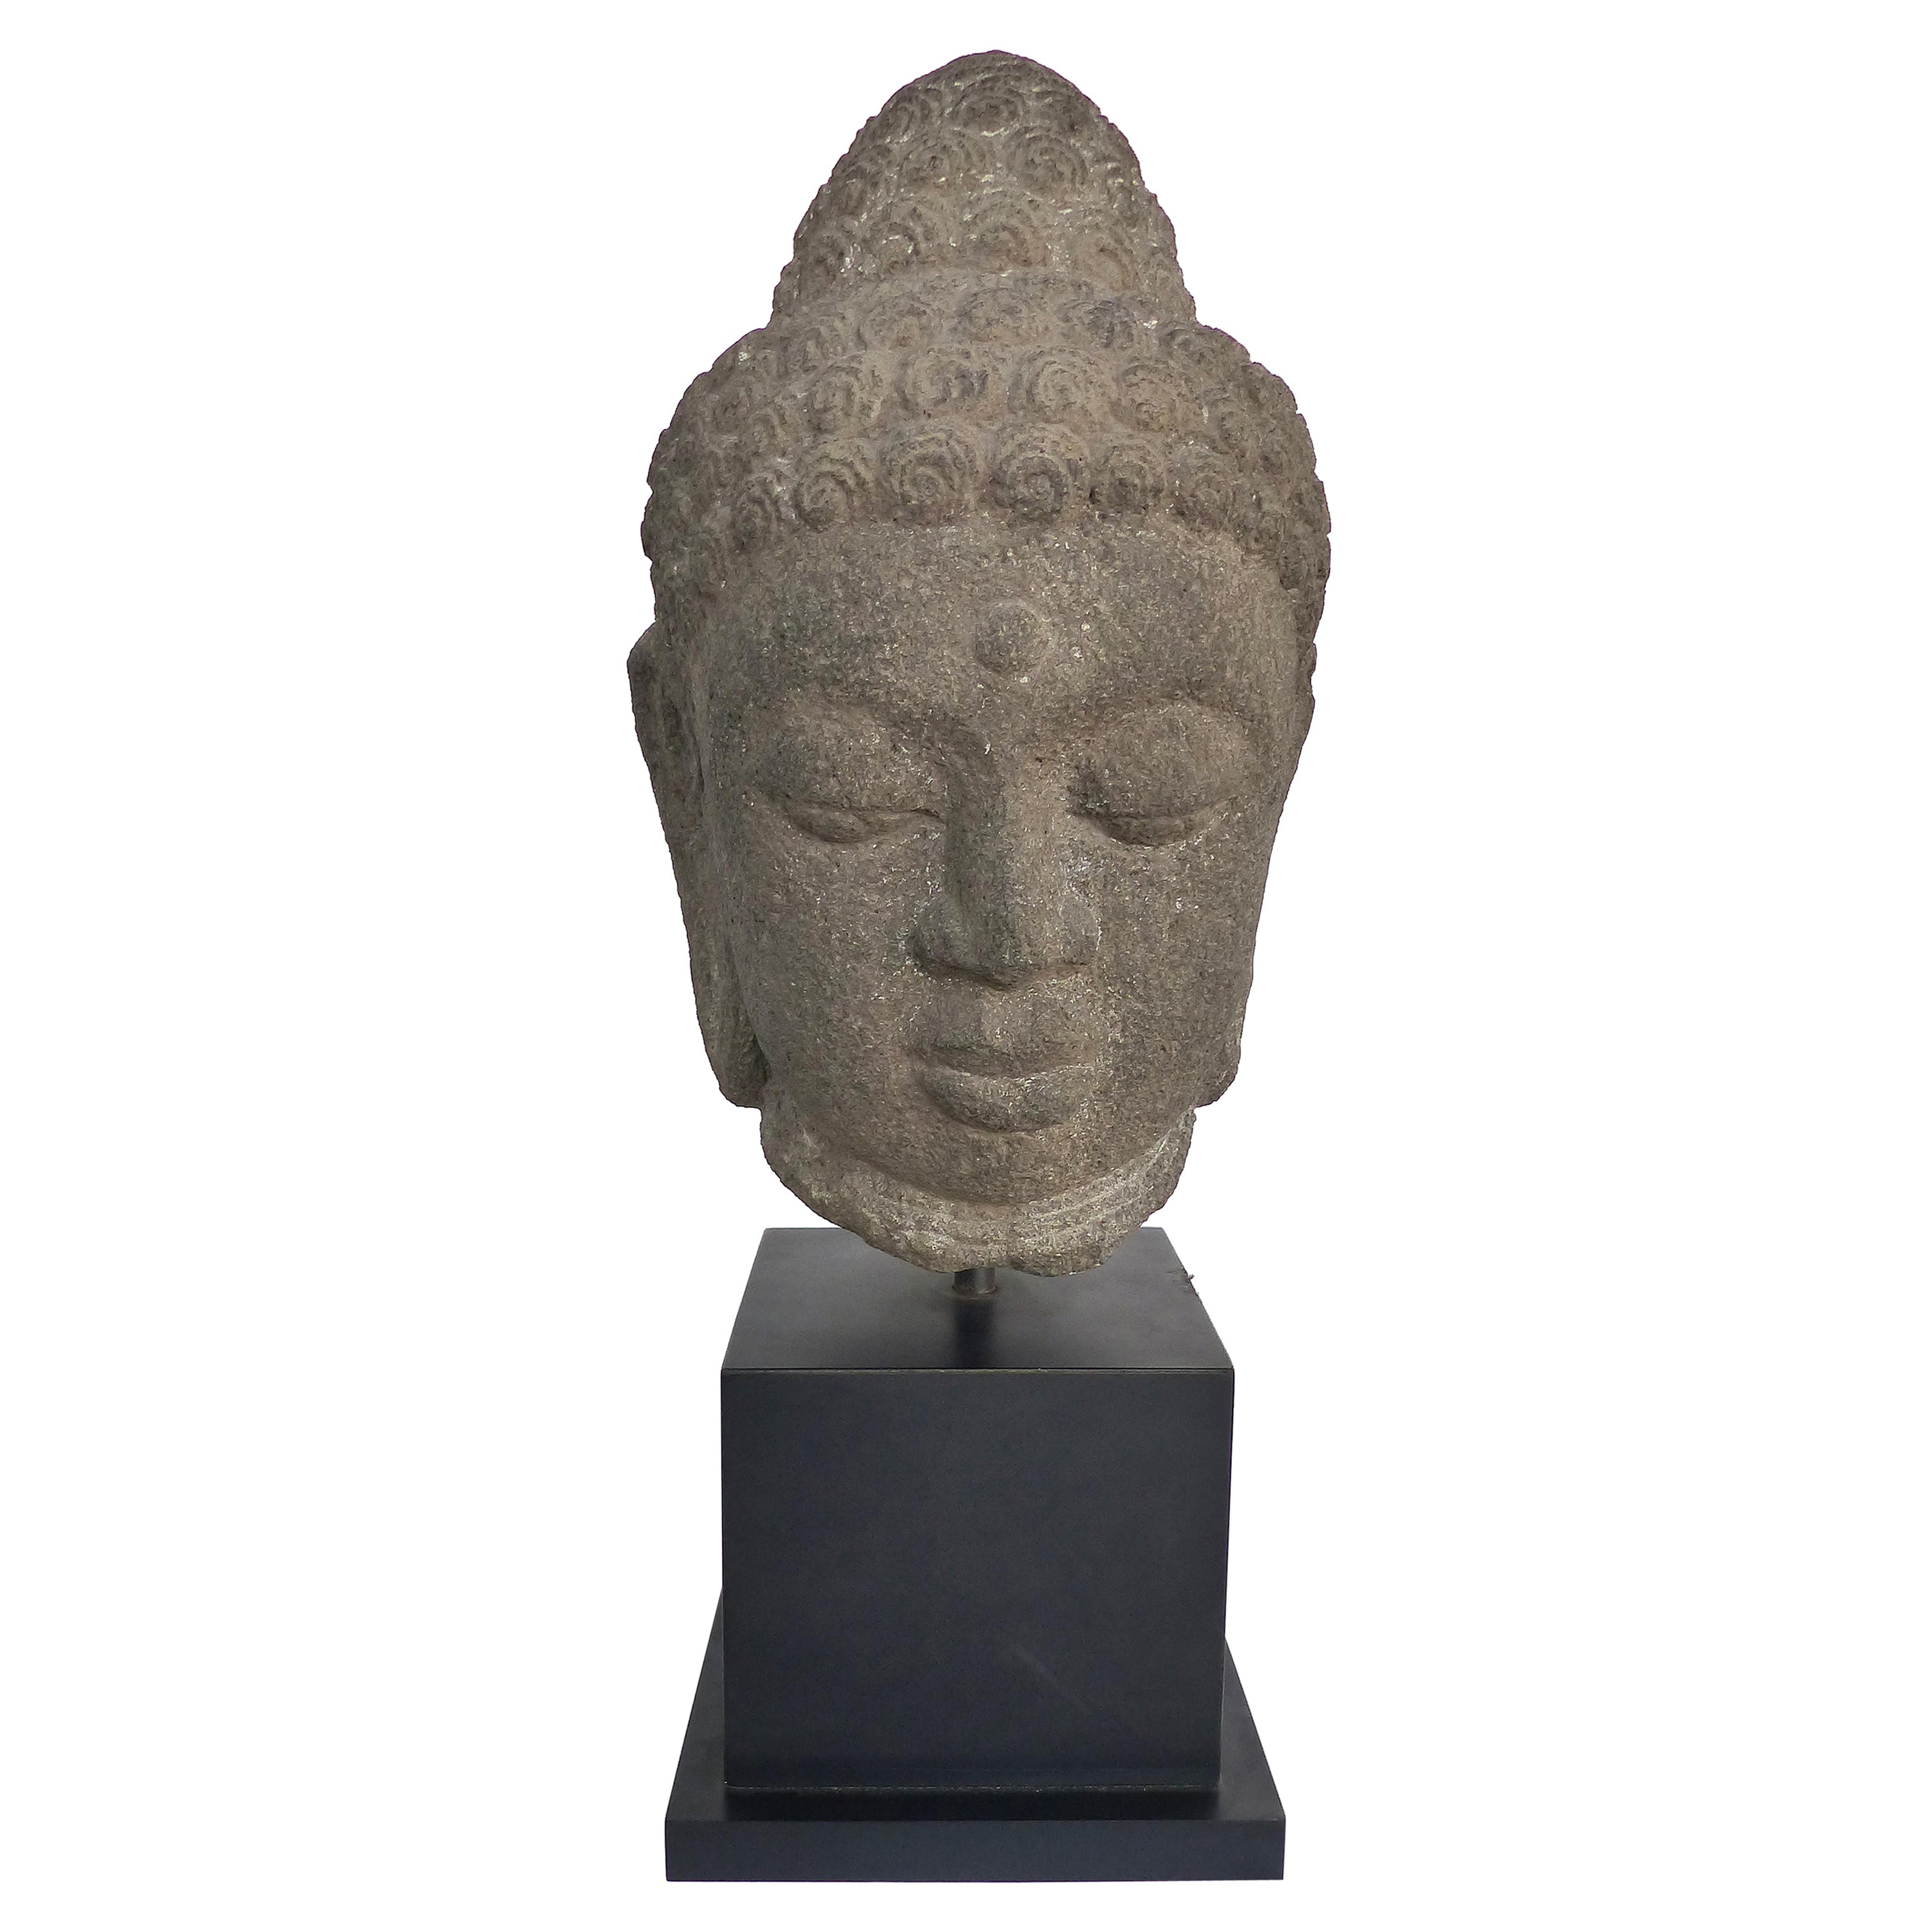 Ancient Carved Stone Buddha Head Sculpture, Provenance Royal-Athena Galleries NY